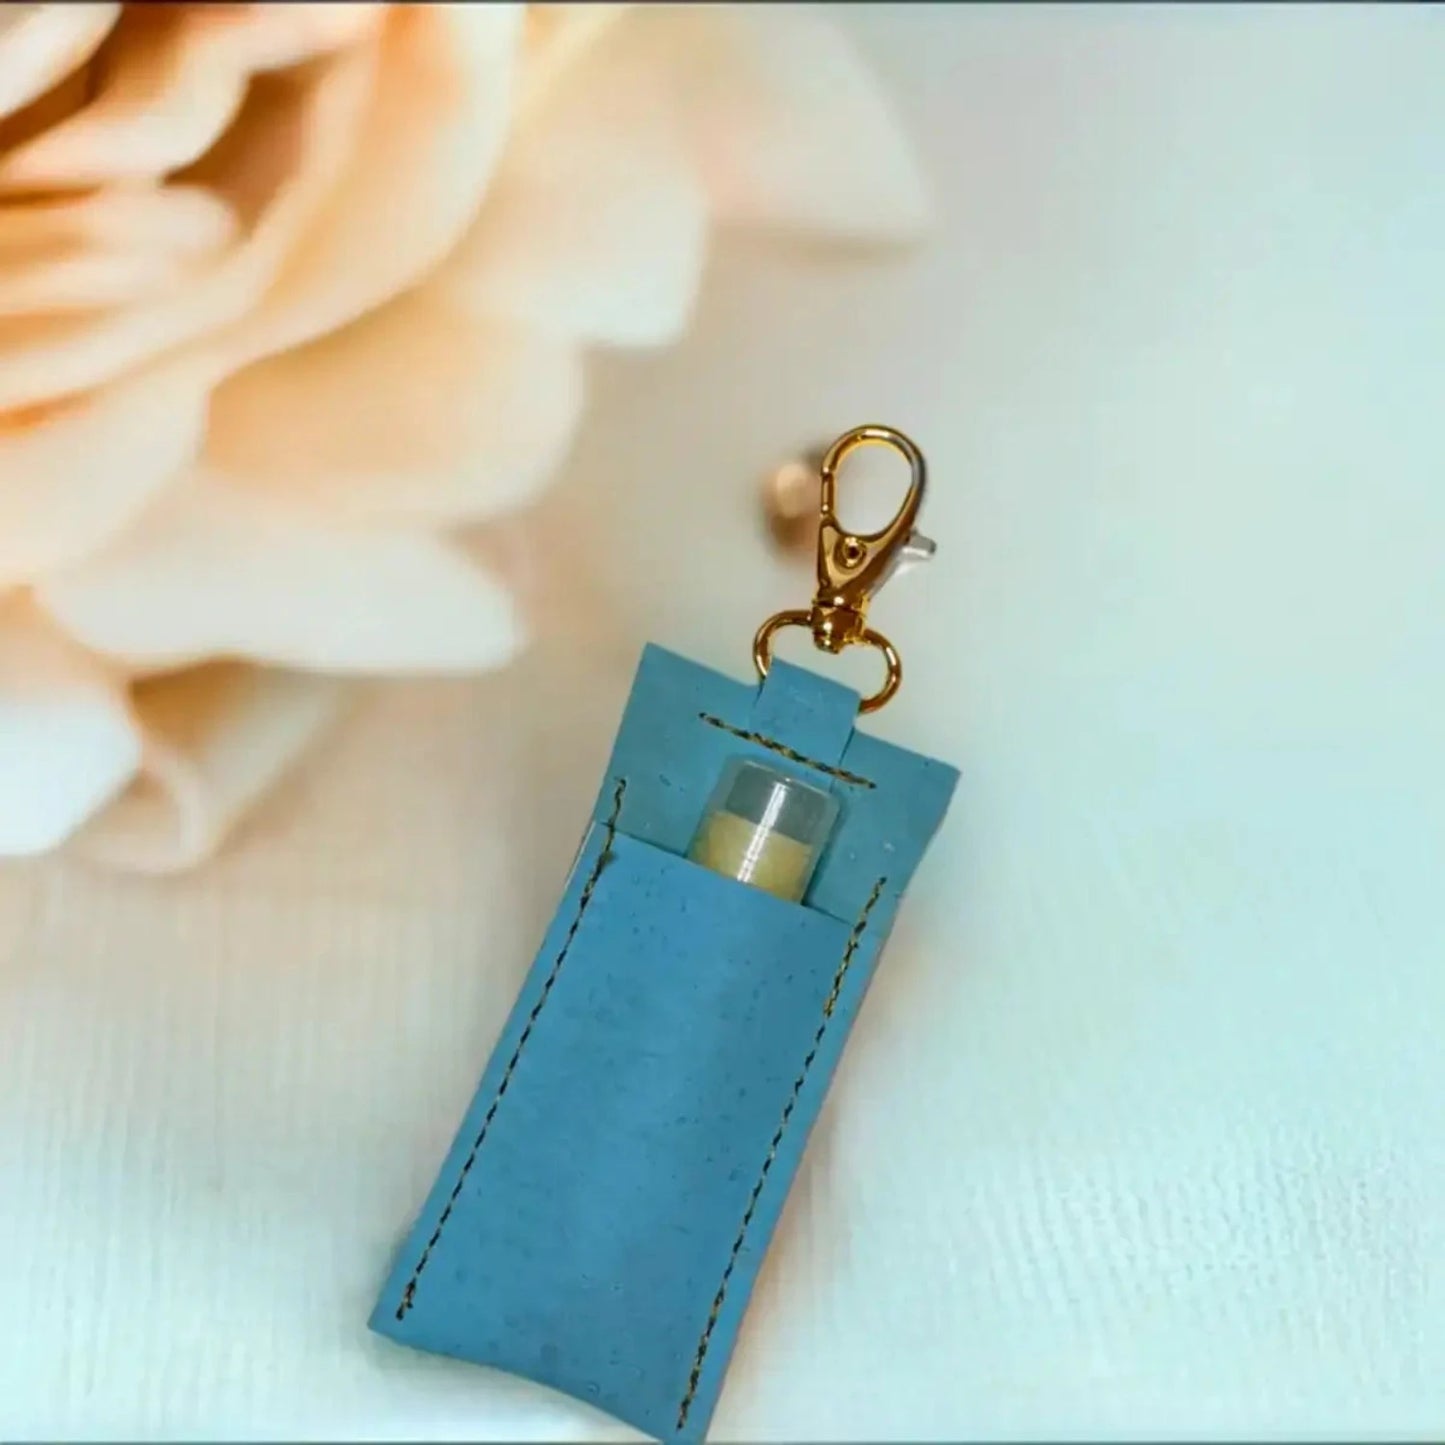 blue lip balm holder with gold color key ring